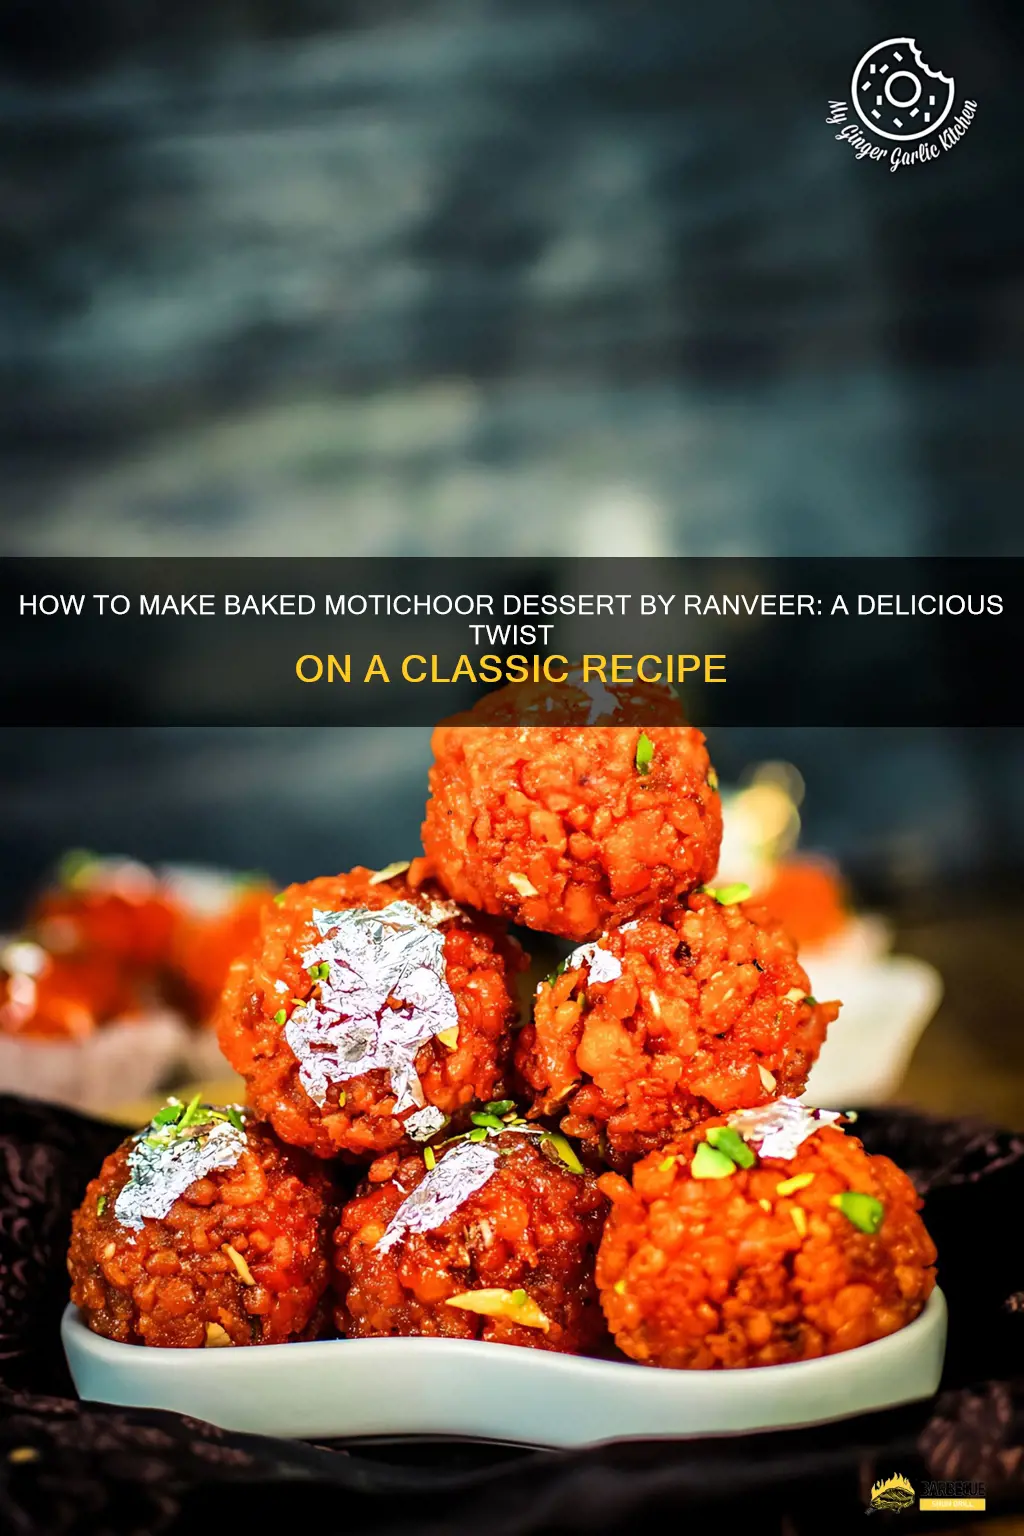 How To Make Baked Motichoor Dessert By Ranveer: A Delicious Twist On A ...